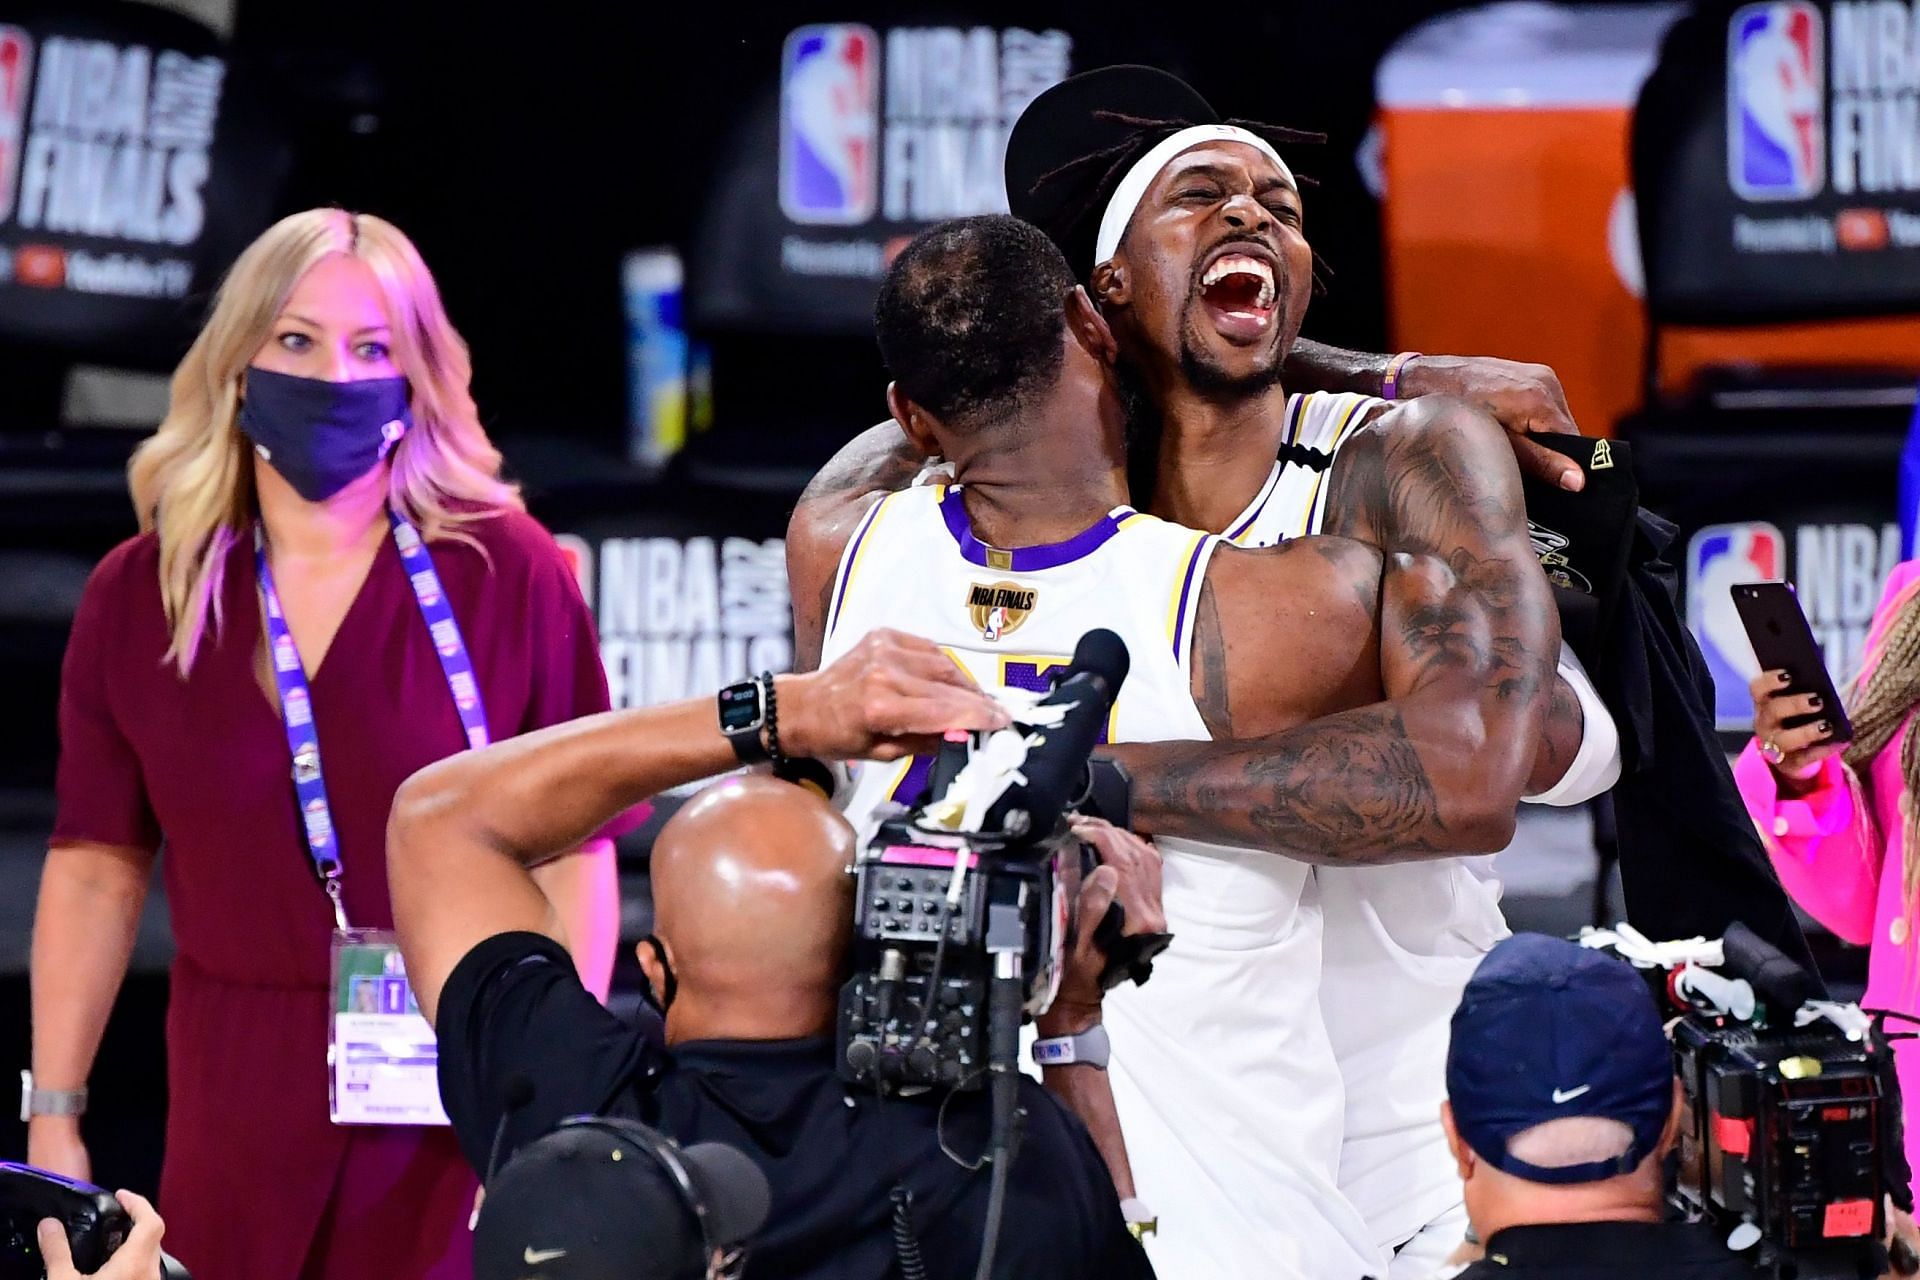 The LA Lakers celebrating after winning the 2020 NBA Finals